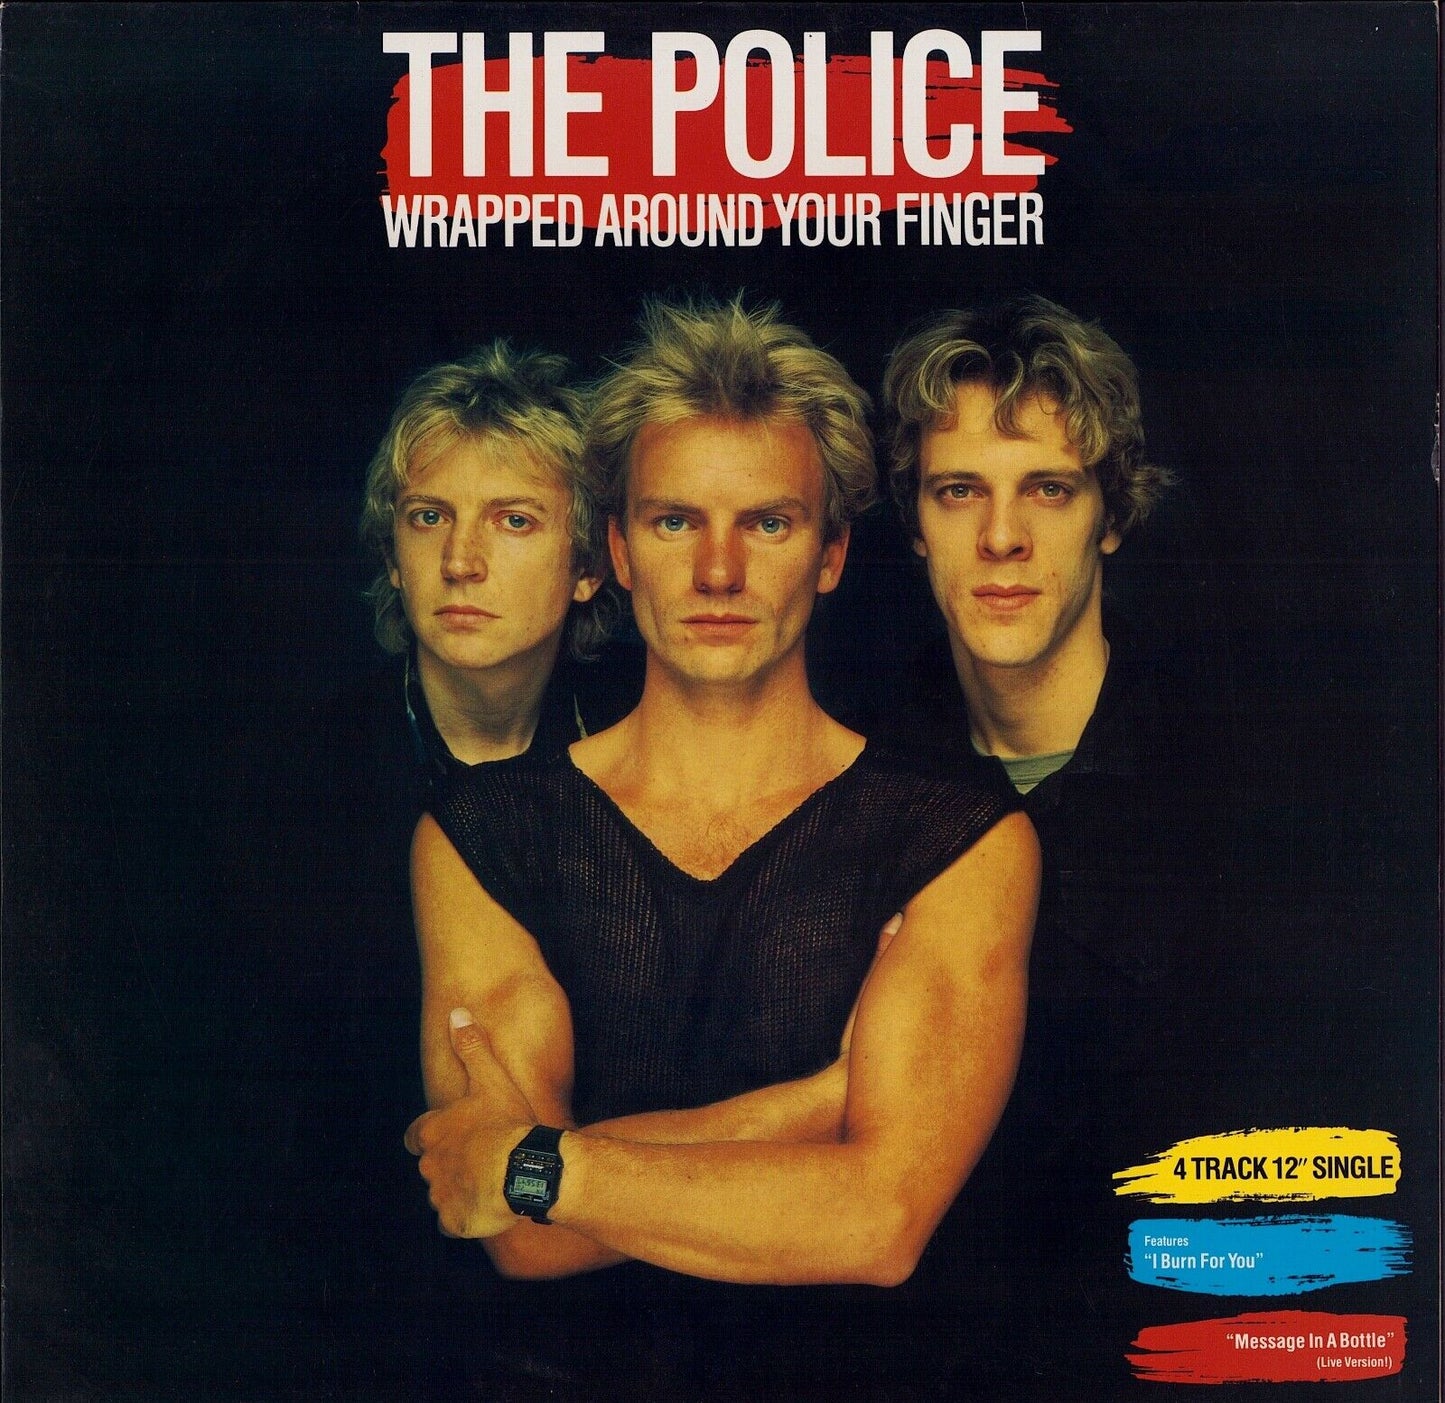 The Police - Wrapped Around Your Finger Vinyl 12"